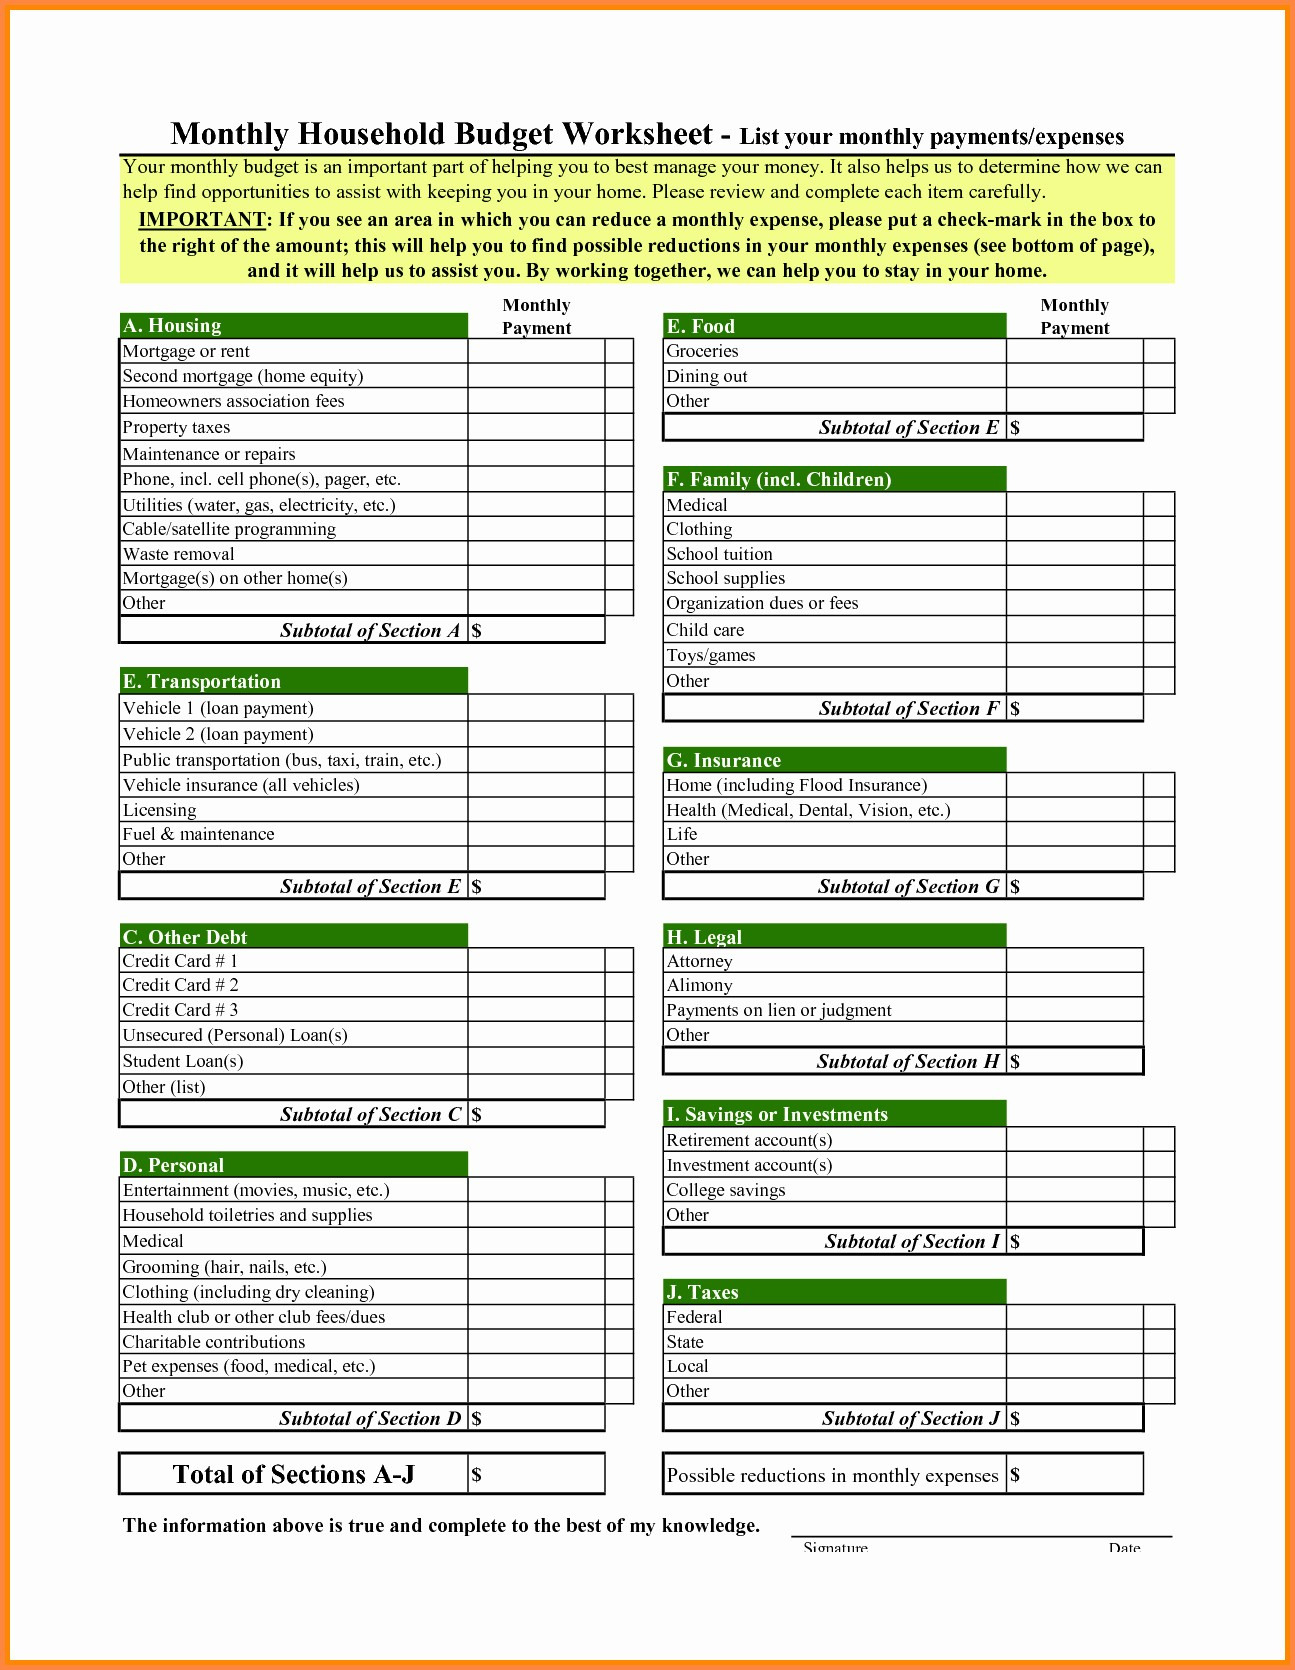 daily-expense-sheet-format-in-excel-gasepromotion